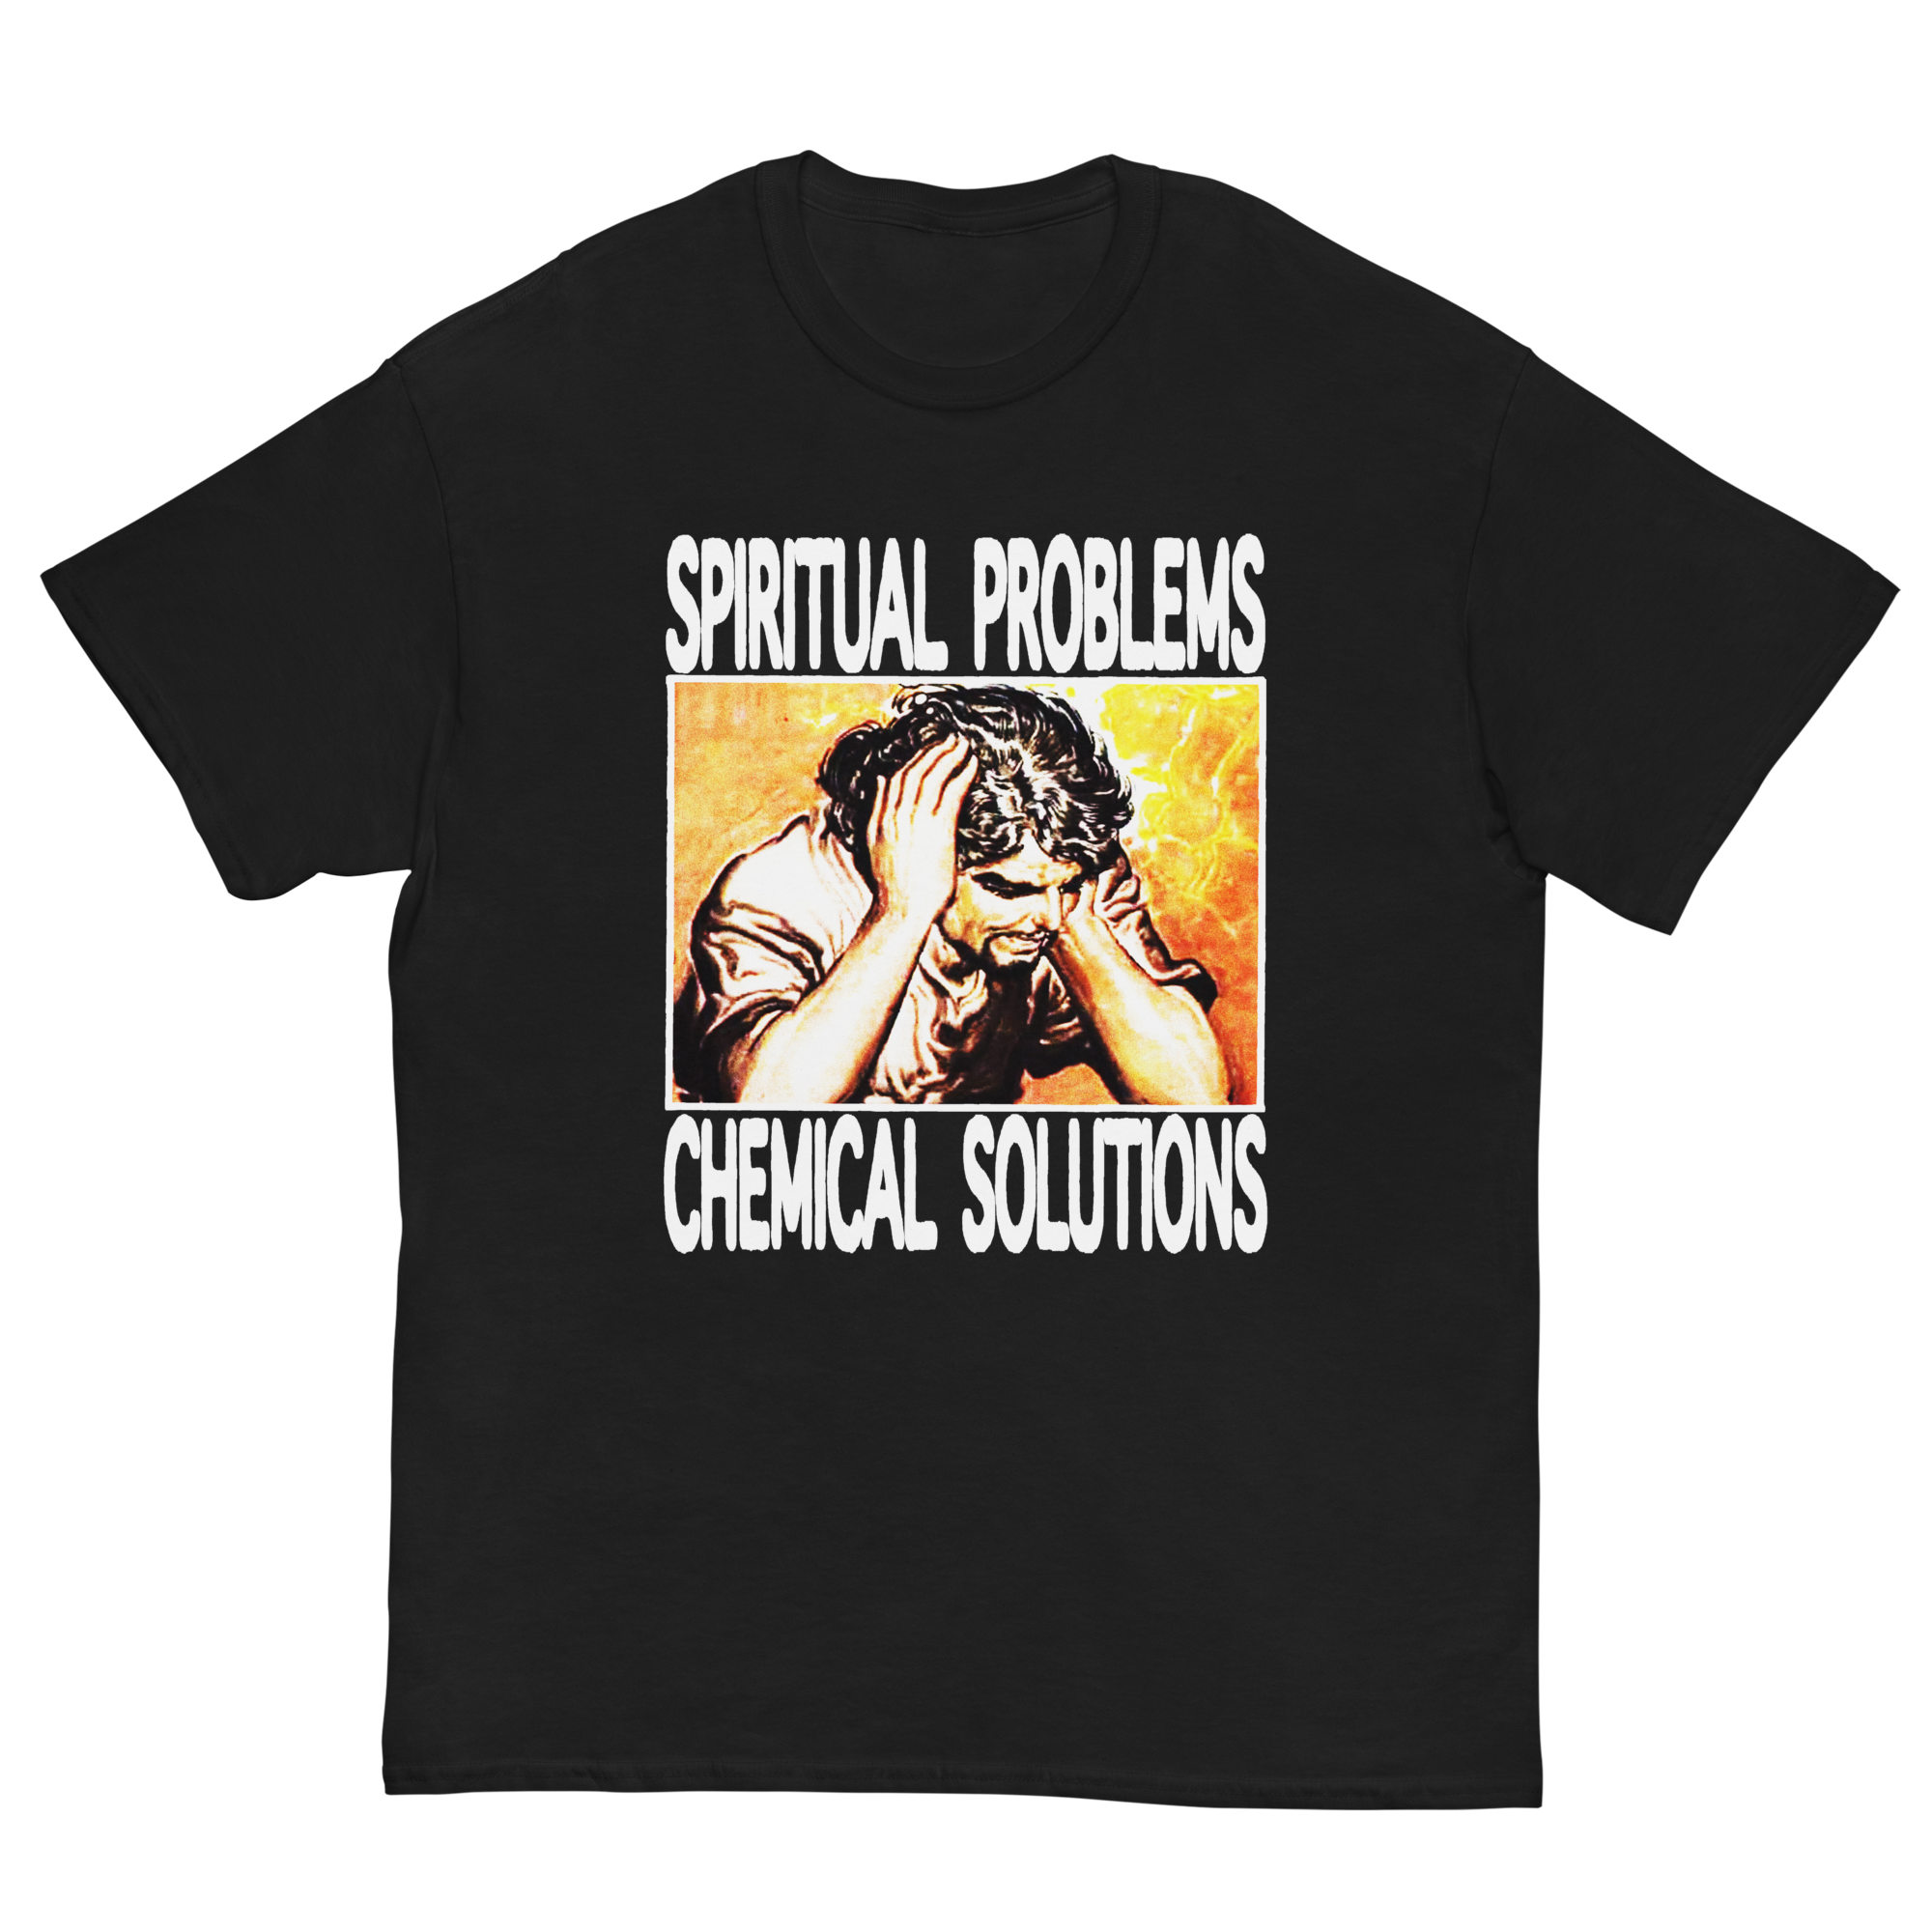 CHEMICAL SOLUTIONS T-SHIRT